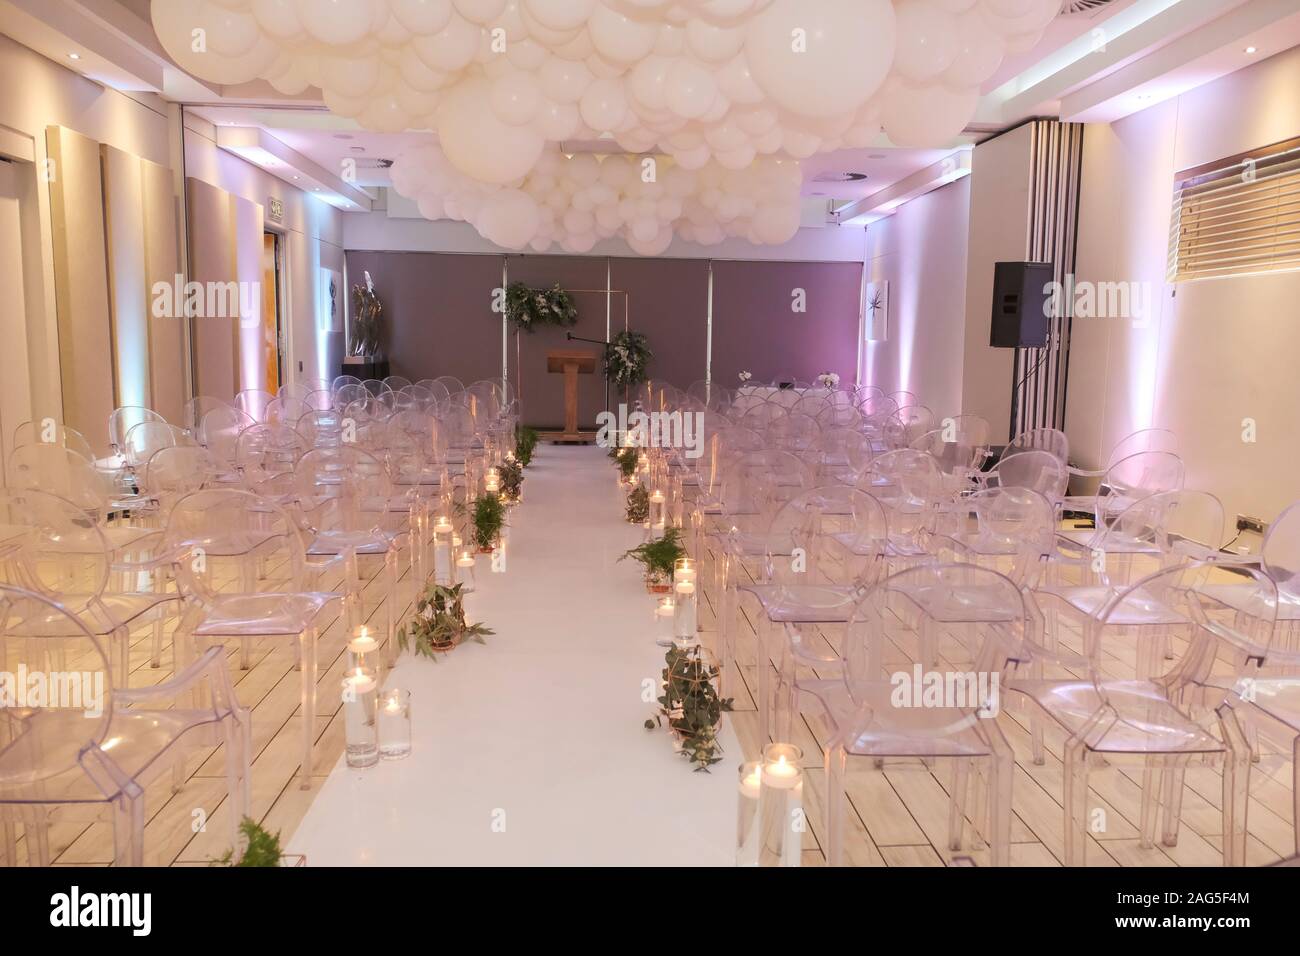 A Wedding Aisle With Empty Chairs Decorated With Candles And